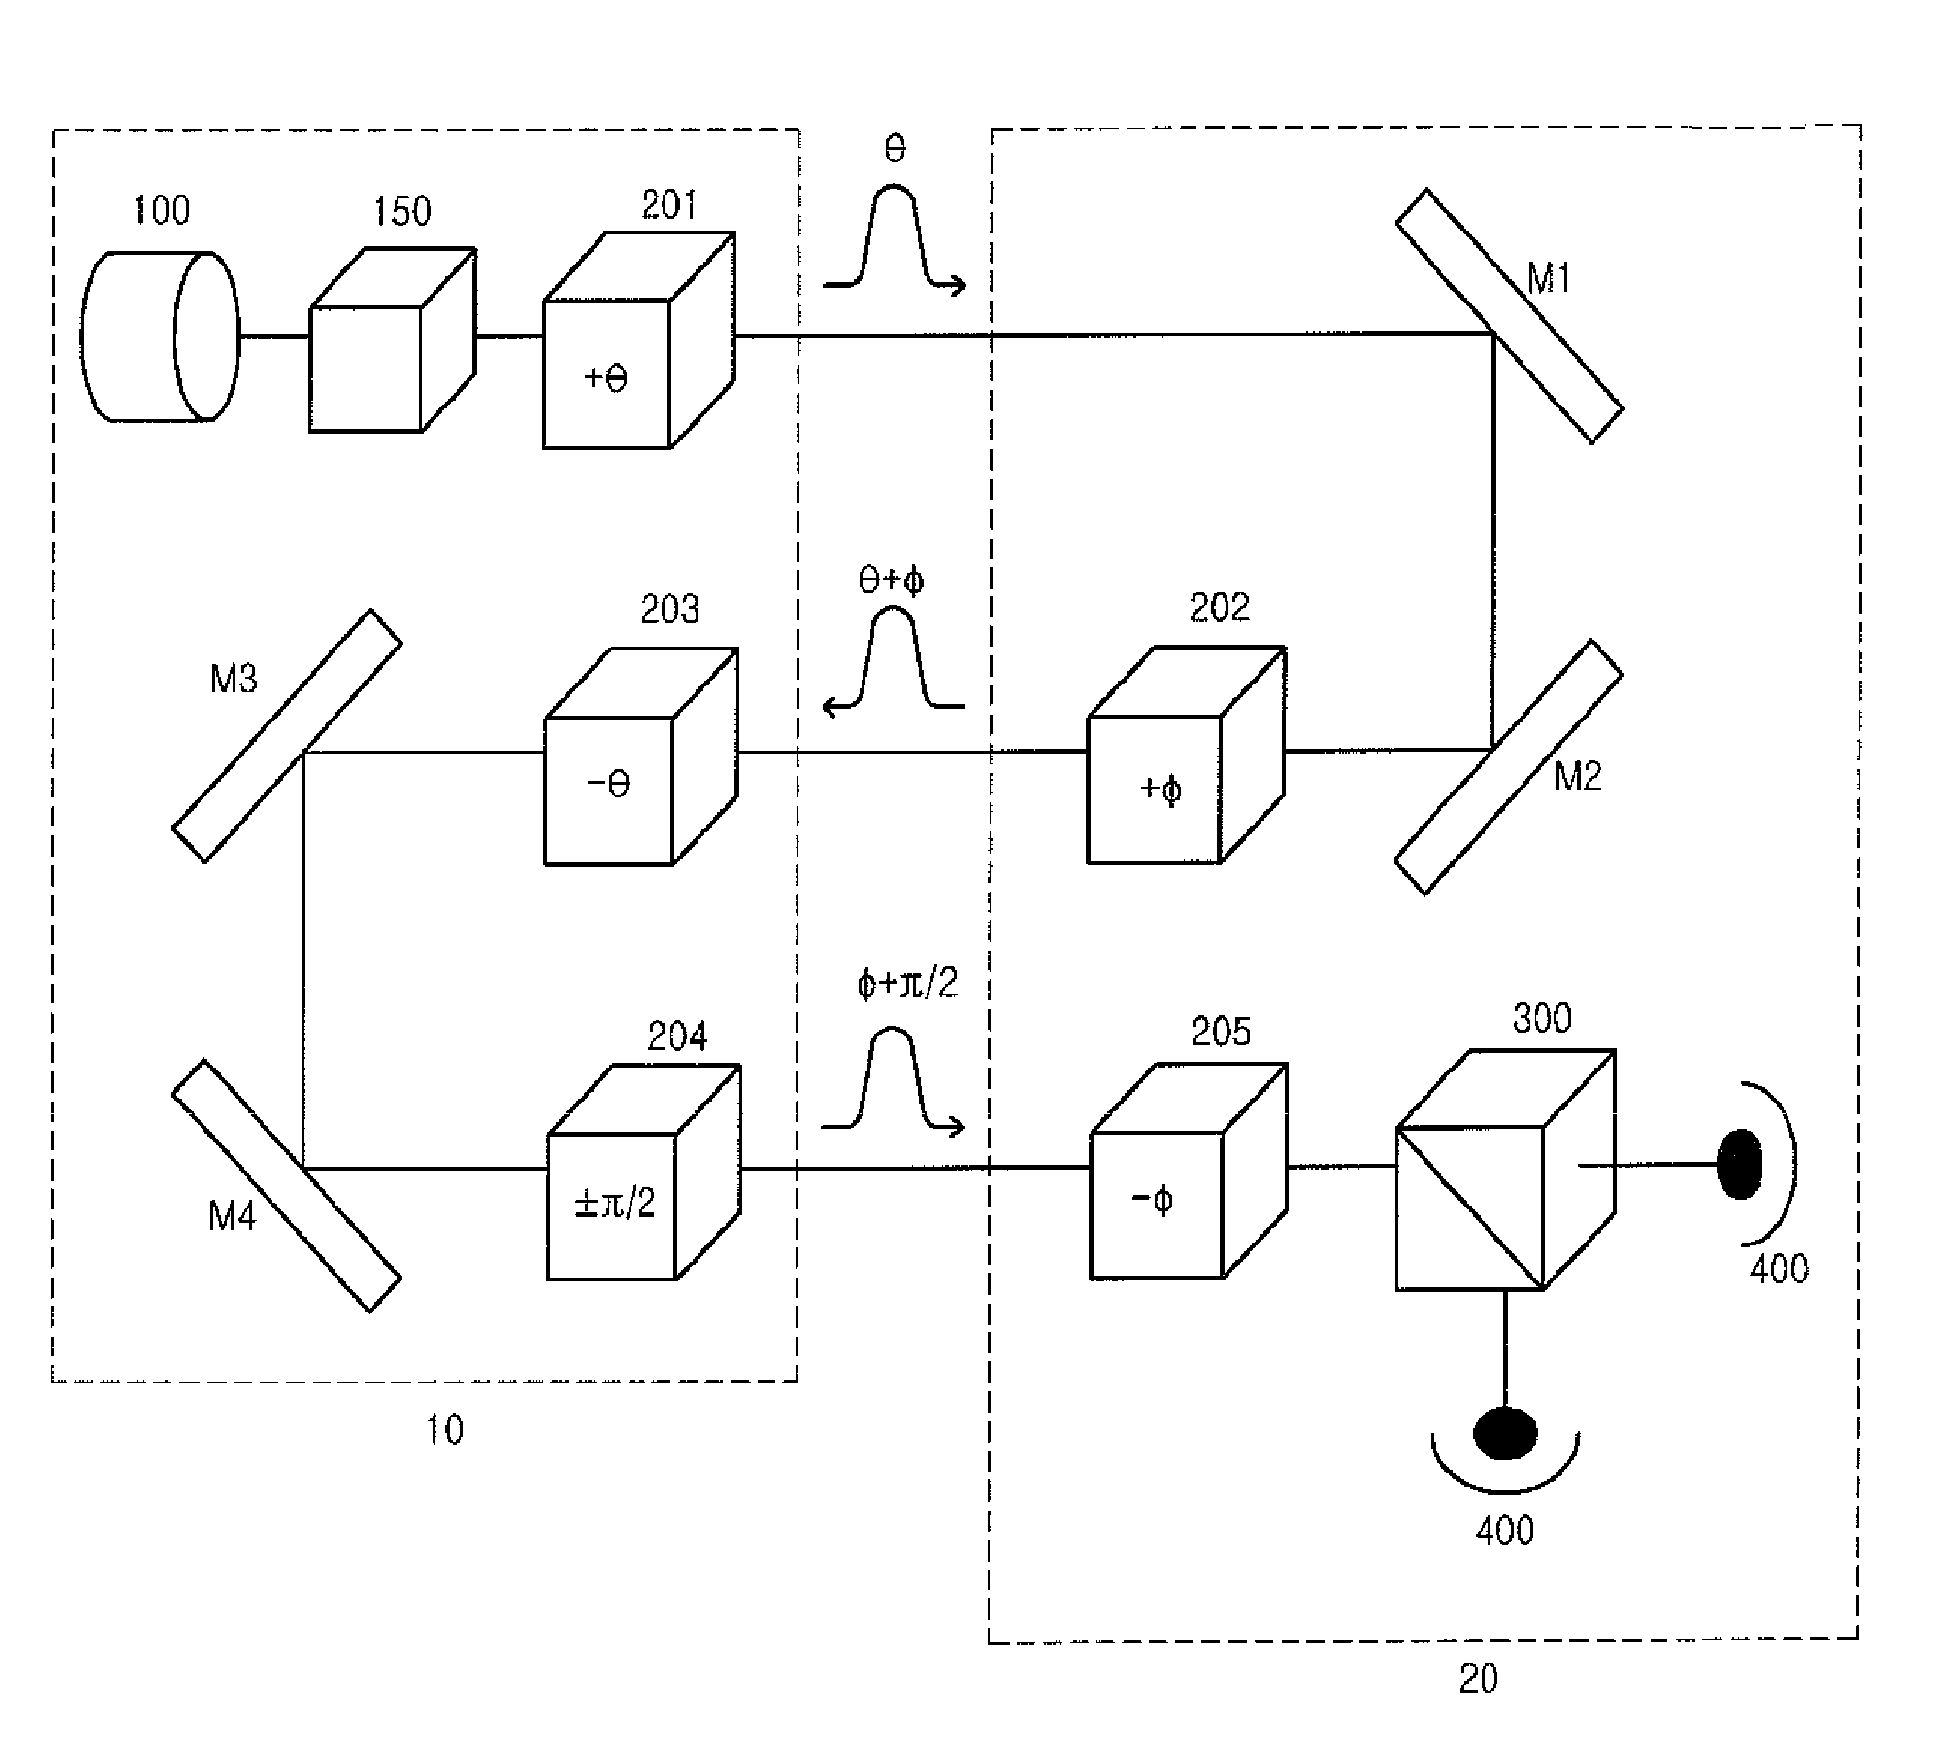 Method of quantum cryptography using blind photon polarization quibits with multiple stages